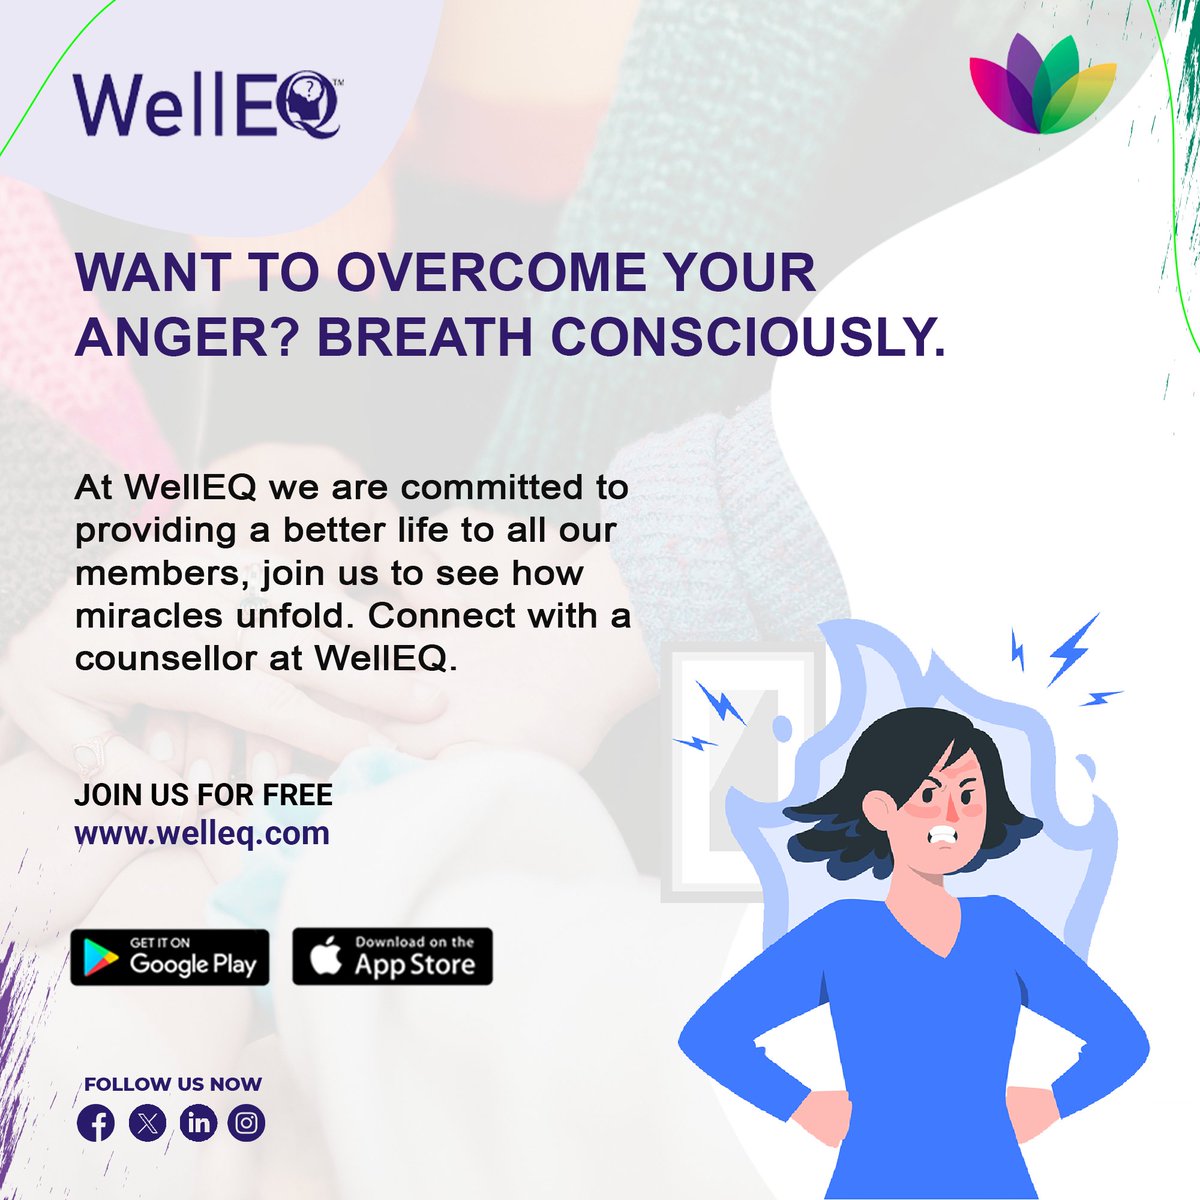 Overcome anger and embrace tranquility with WellEQ’s conscious breathing techniques. Connect with a counselor and start your journey to a better life today. Join us for free!
.
.
#WellEQ #AngerManagement #ConsciousBreathing #Counseling #MentalWellness #EmotionalHealth #SelfHelp